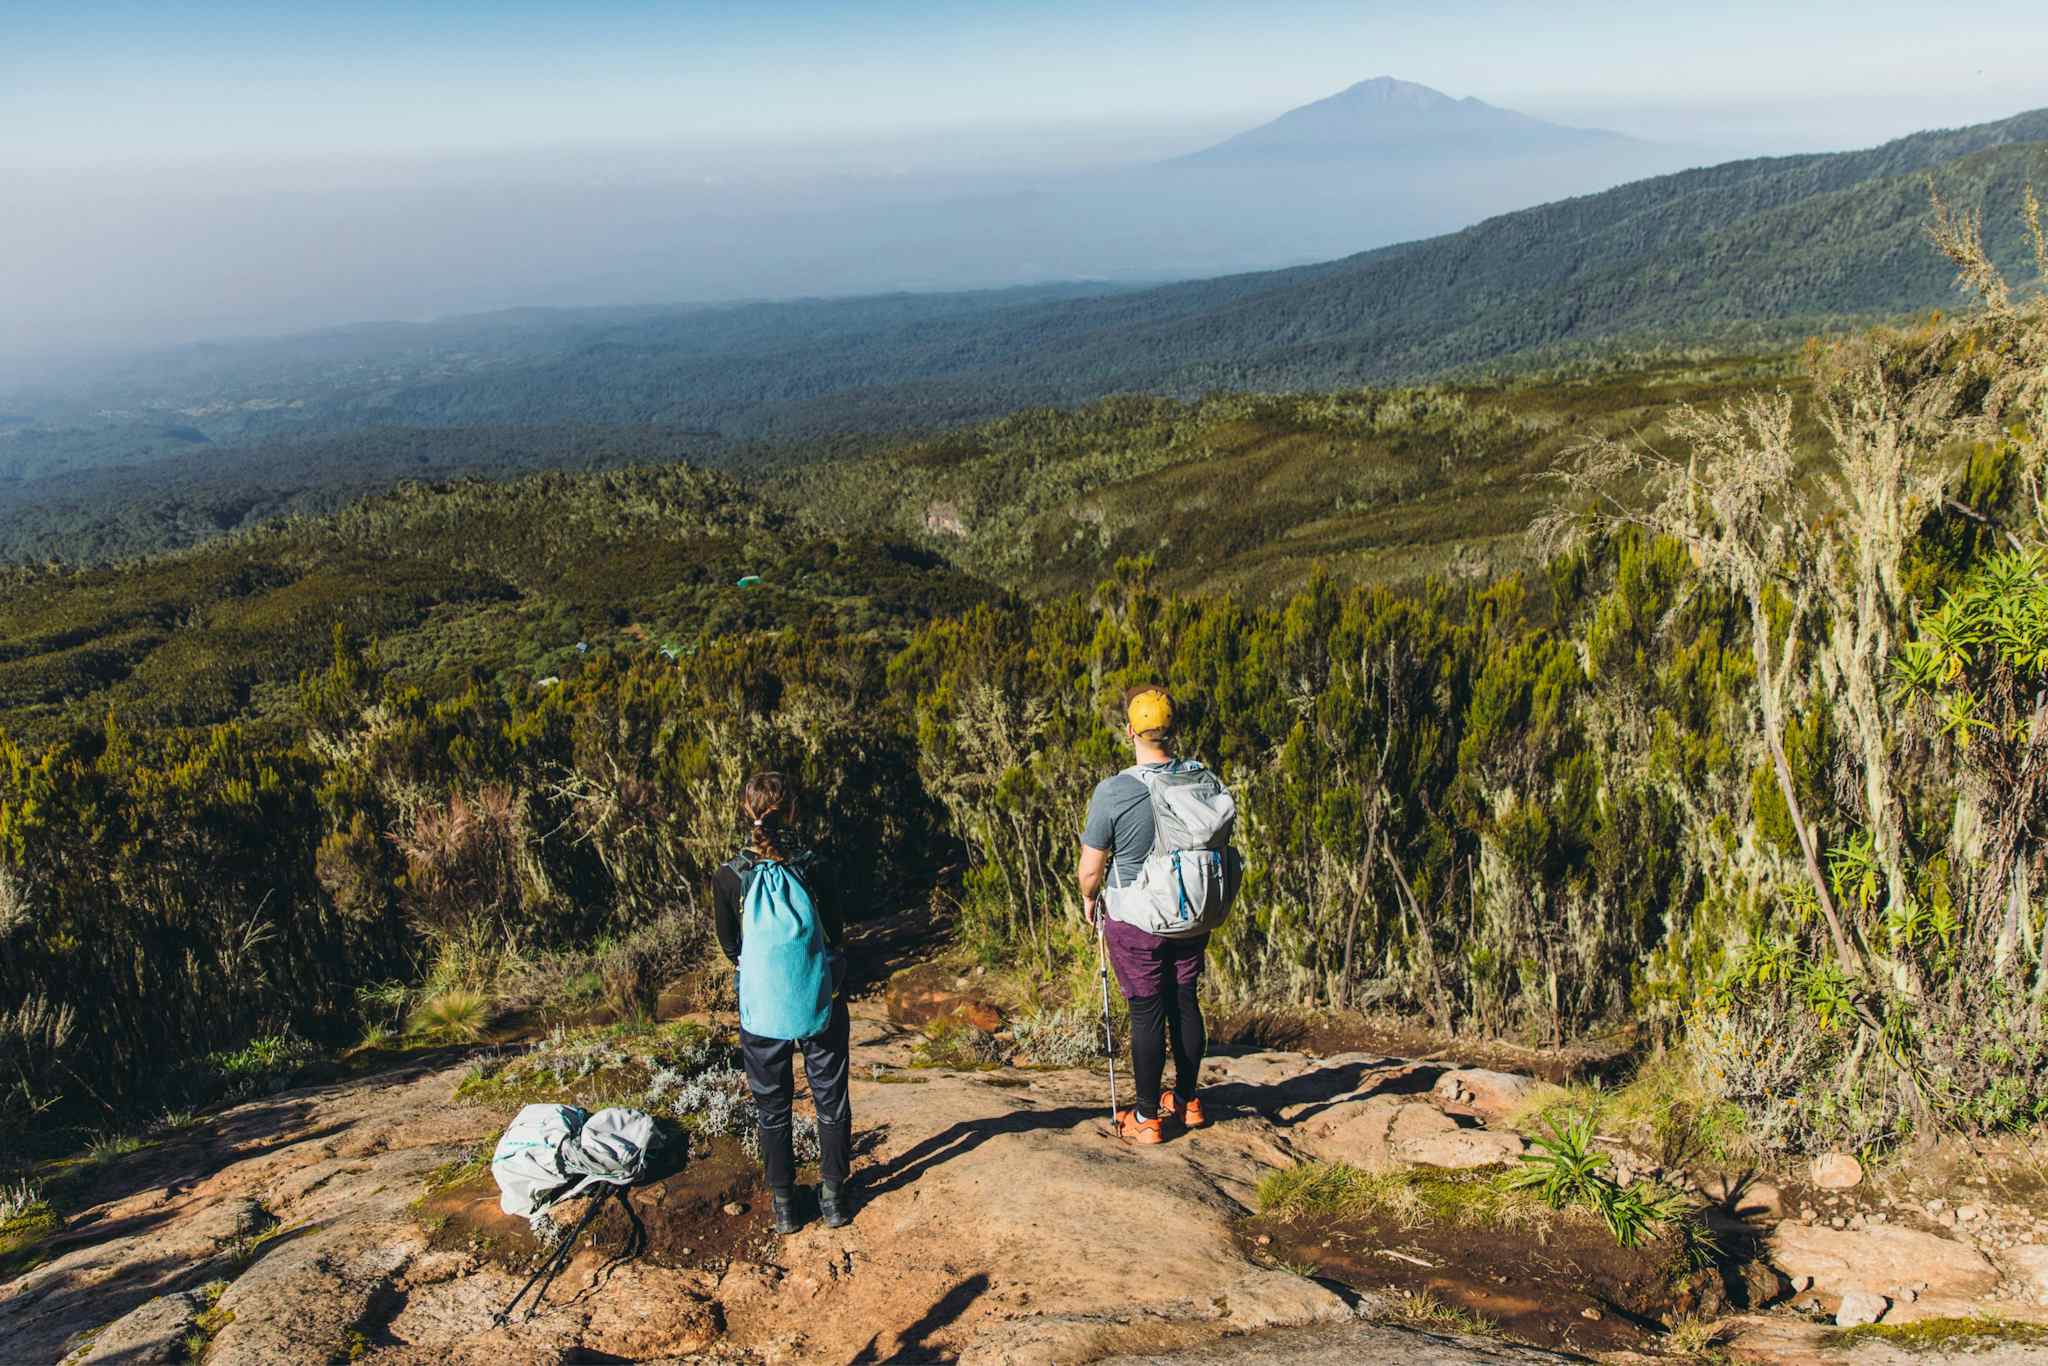 Hikers on Kilimanjaro with a view of Mount Meru, overlooking forests in Tanzania.